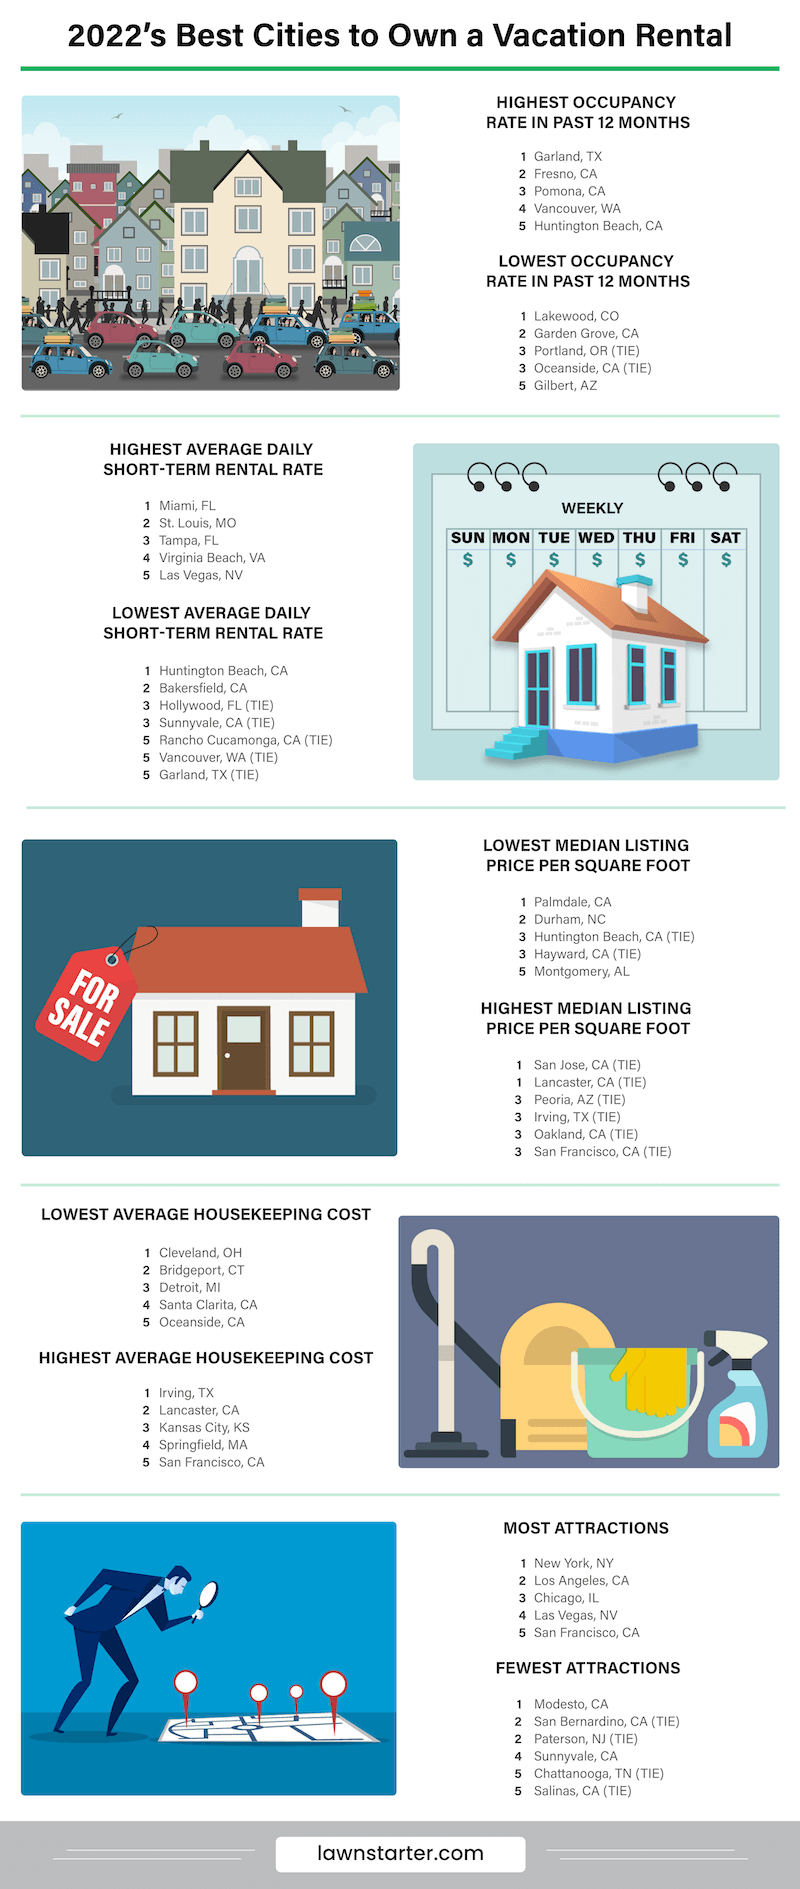 Infographic showing the Best Cities to Own a Vacation Rental, a ranking based on investment costs, expenses, revenue potential, and more